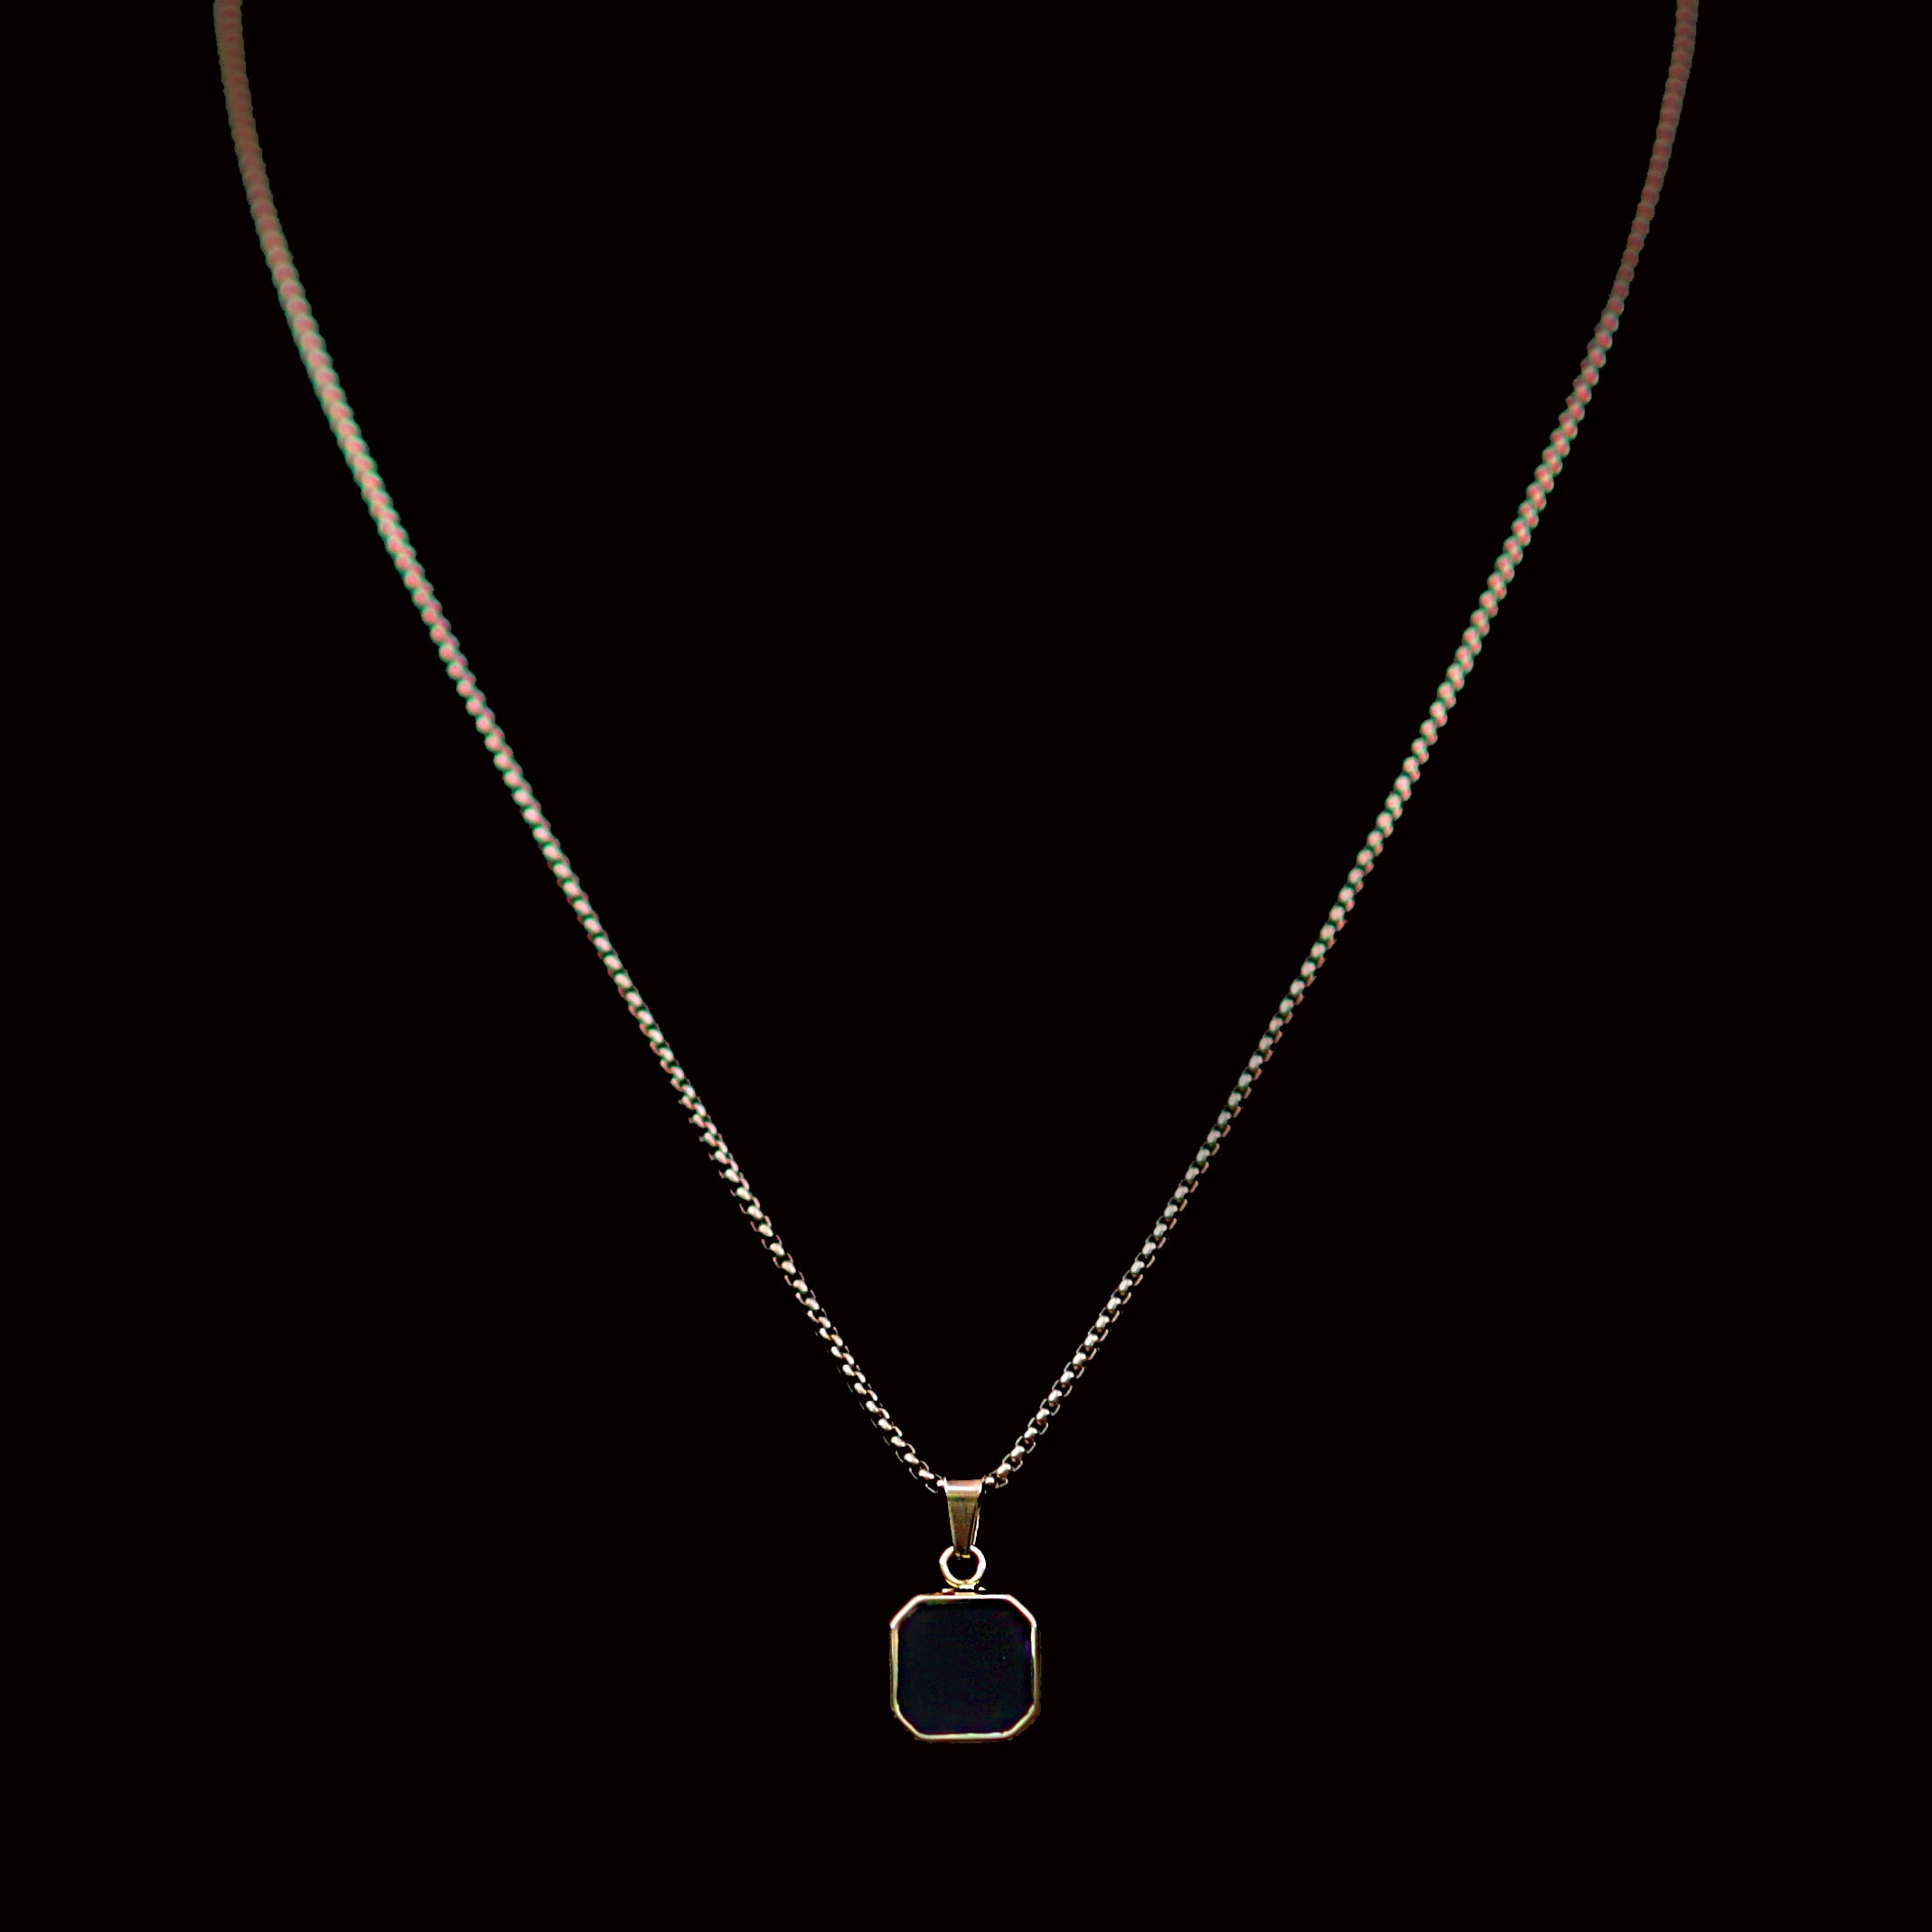 Aden Stainless Steel Box Chain Necklace with Square Stone Pendant